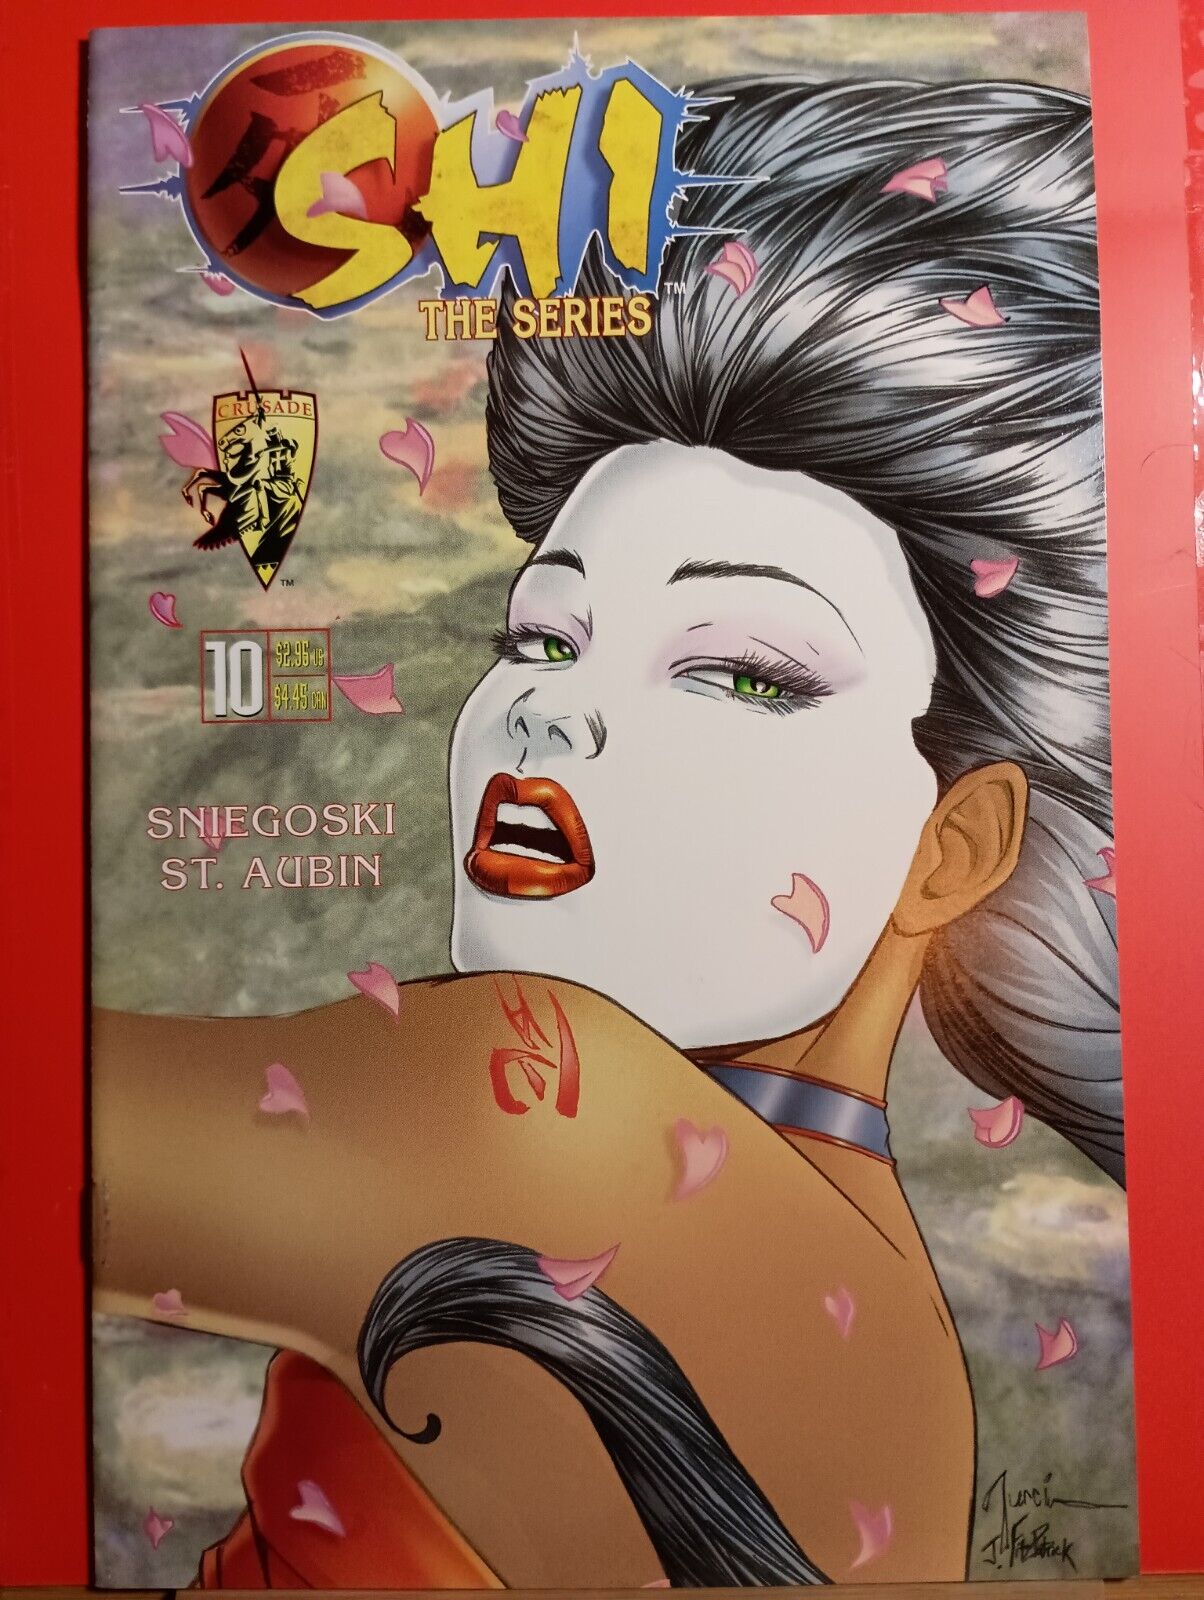 1998 Crusade Comics Shi The Series Issue 10 William Tucci Cover D Variant FREE S